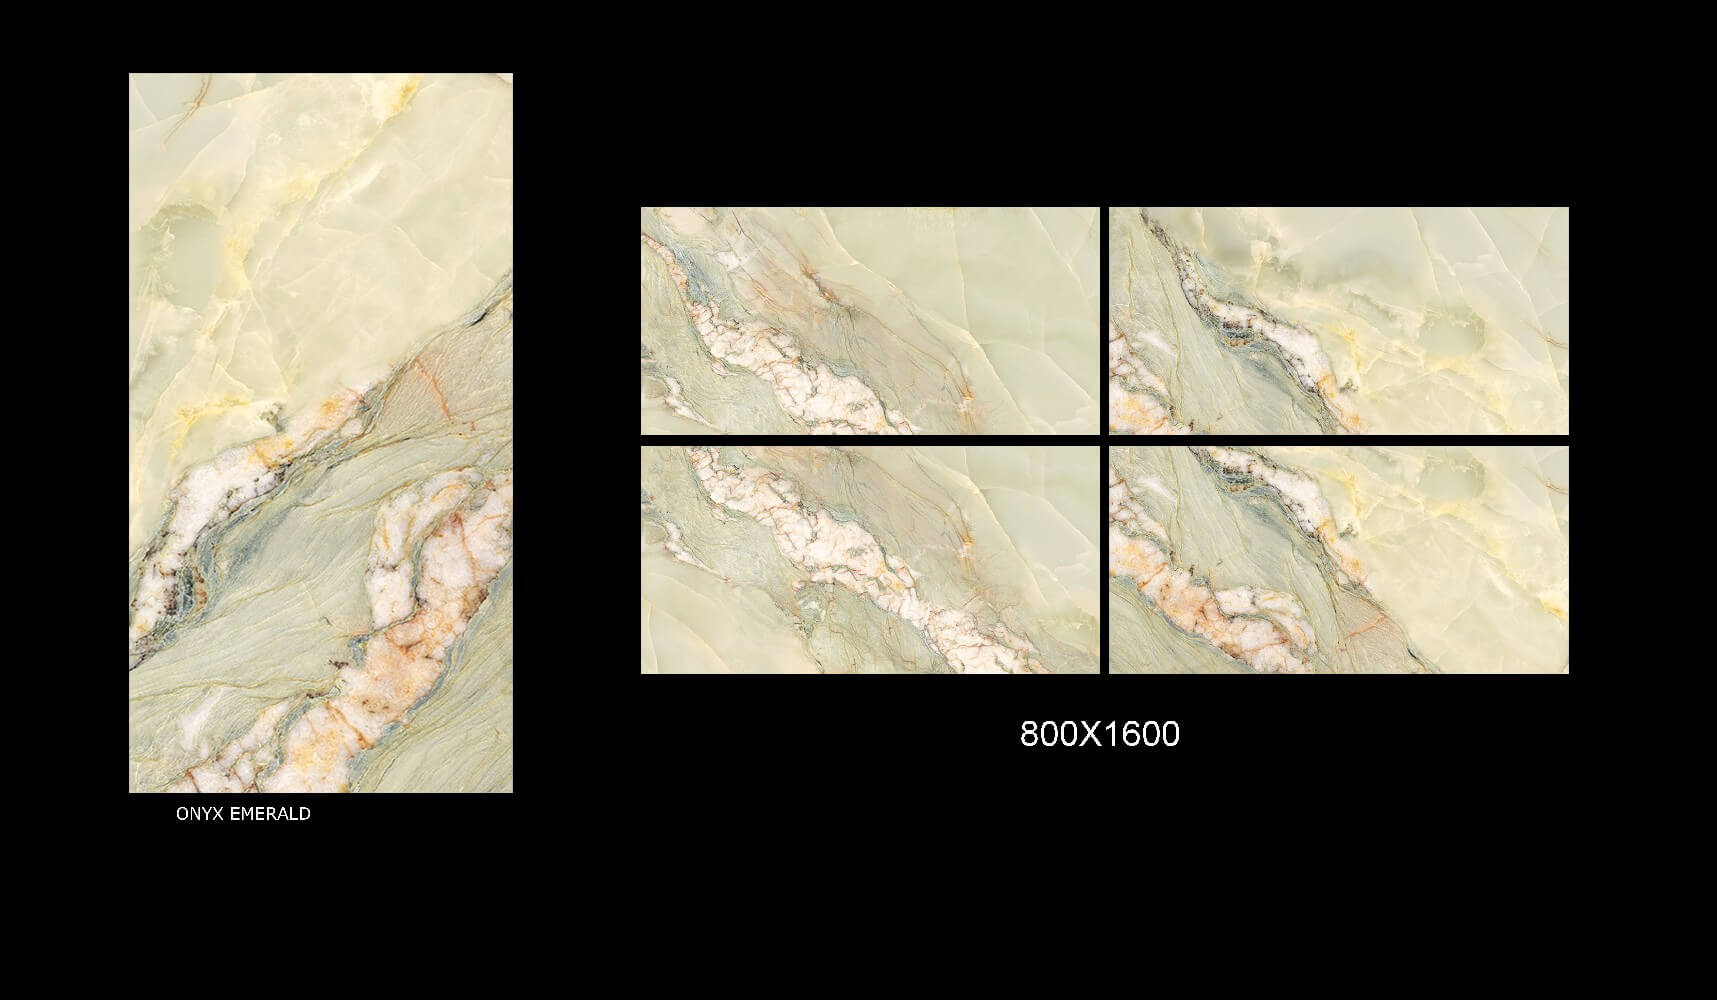 Onyx Emerald Rectified Large Format Exotic Surface Stone Effect Porcelain 800x1600mm Floor & Wall Tiles